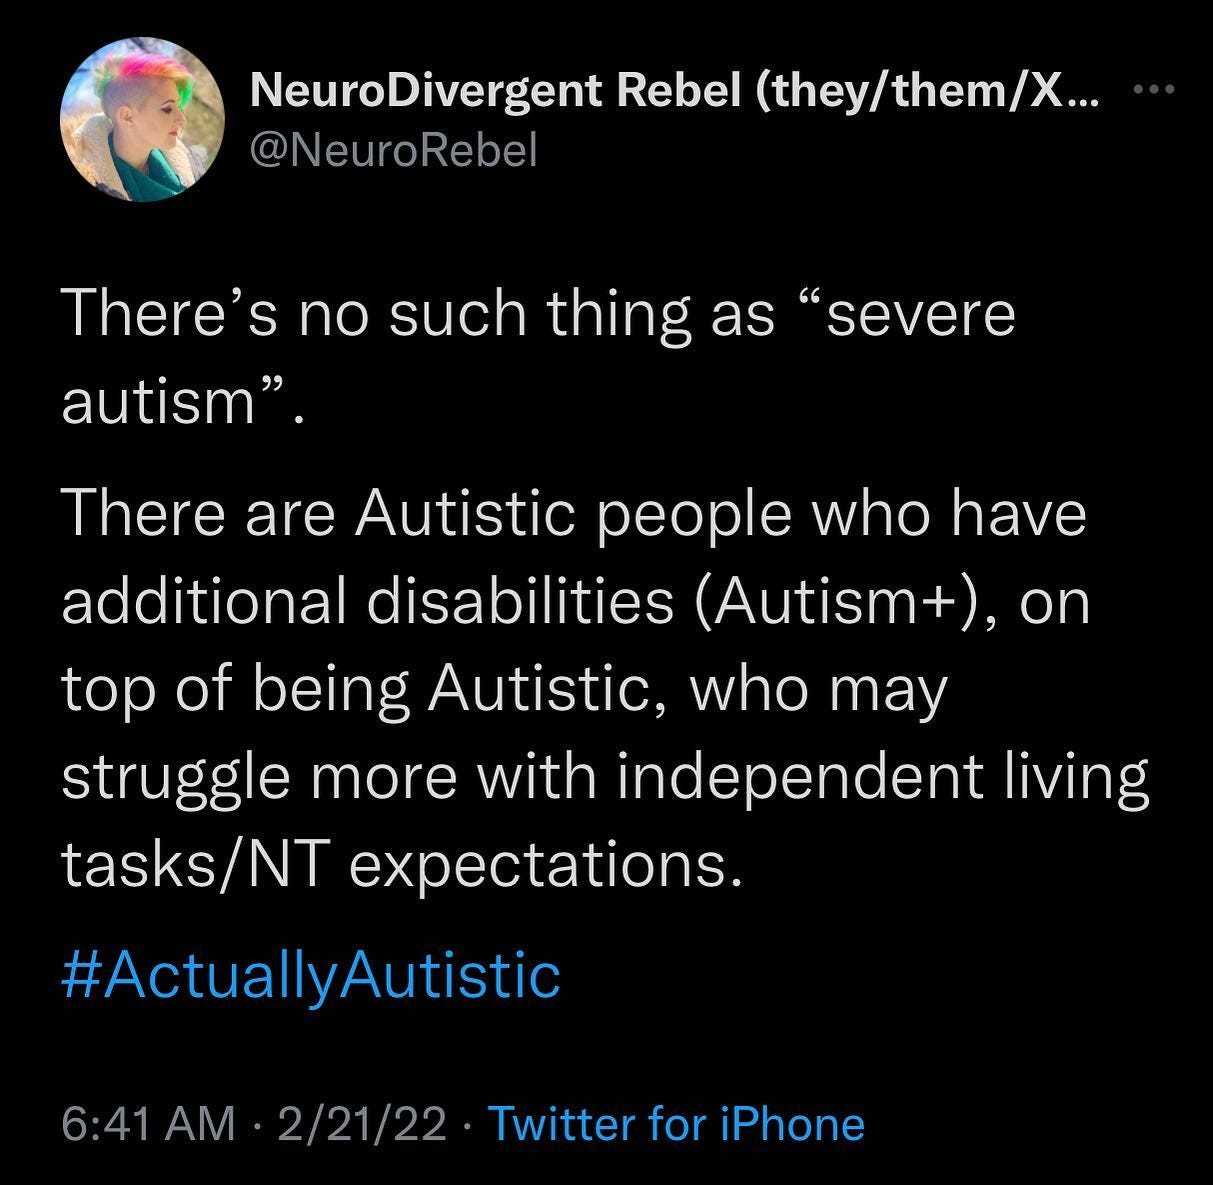 Tweet from NeuroRebel (they/them) Feb 21, 2022 that reads: "There's no such thing as severe Autism. There are Autistic people who have additional disabilities (Autism+), on top of being Autistic, who may struggle more with independent living tasks/NT (NeuroTypical) expectations."